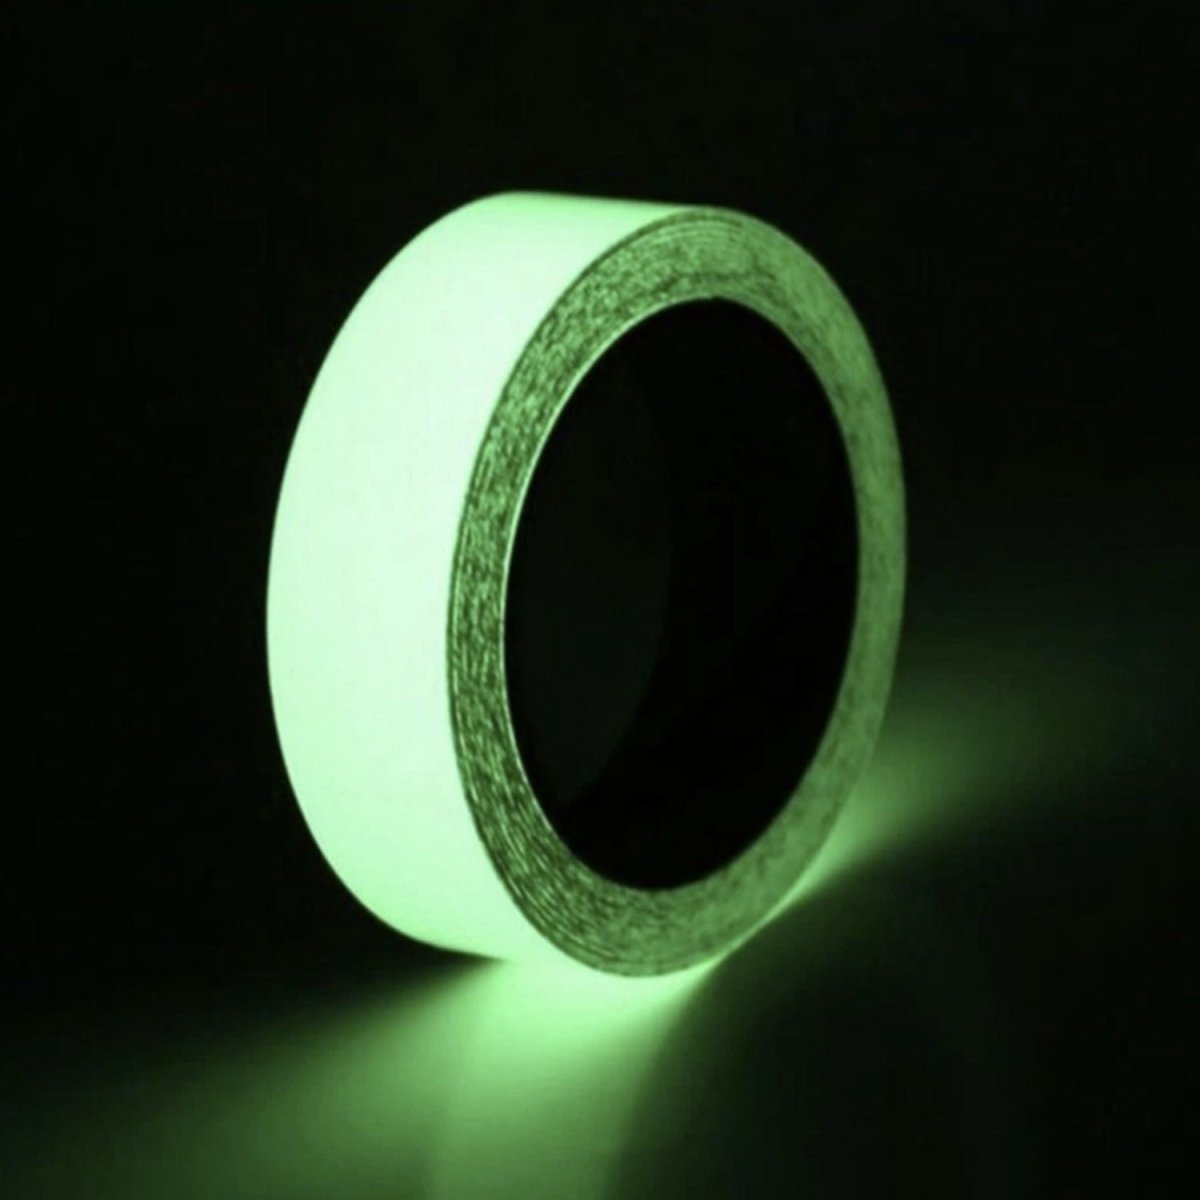 10M 10mm Luminous Tape INTENSE Glow In The Dark Safety Sticker Party Emergency - Asia Sell